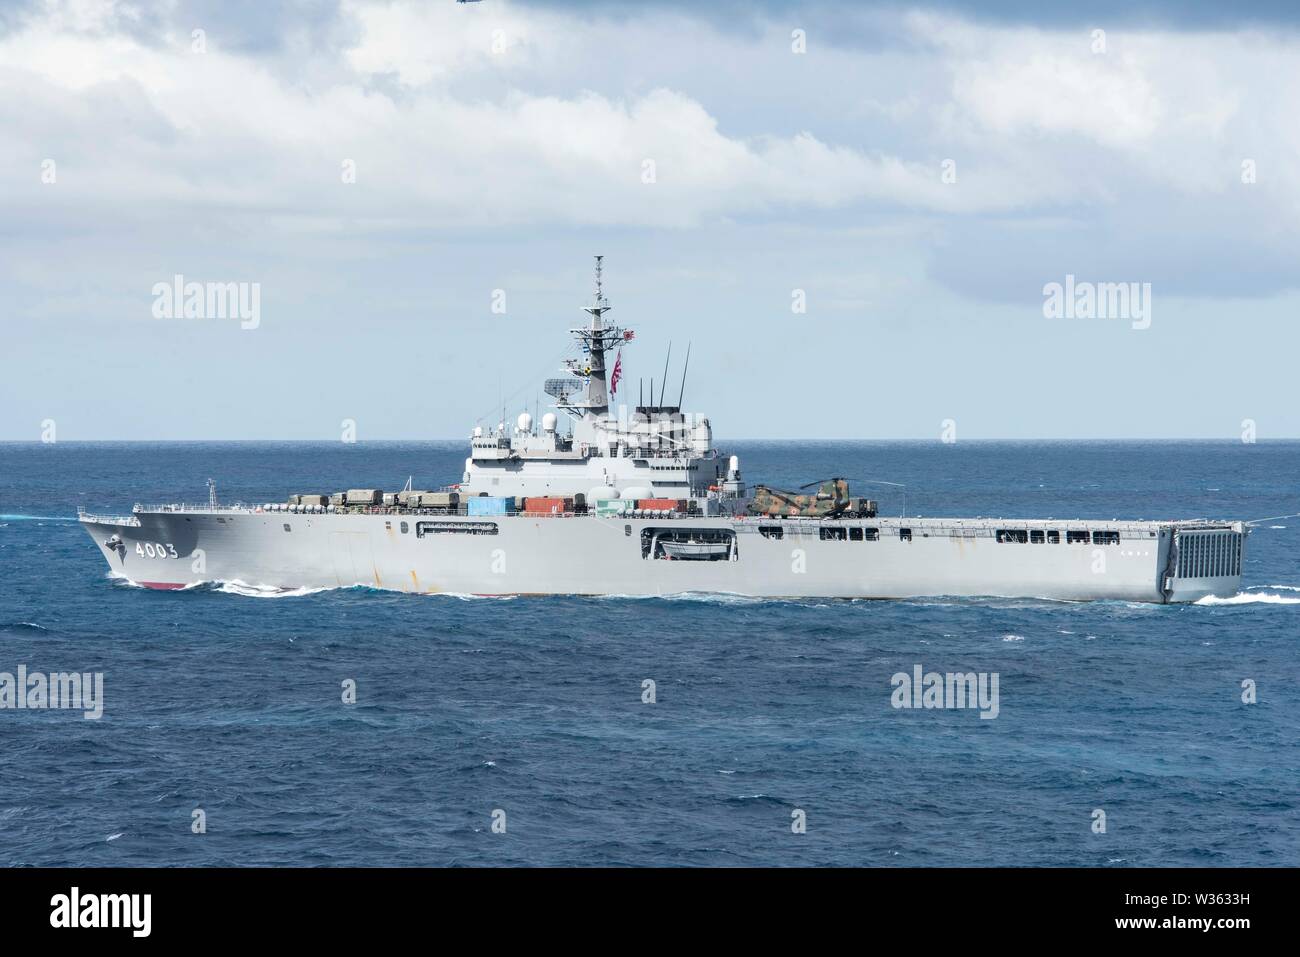 190711-N-DX072-1047 TASMAN SEA (July 11, 2019) The Japan Maritime Self-Defense Force Ōsumi-class amphibious transport dock ship JS Kunisaki (LST 4003) transits with the amphibious transport dock ship USS Green Bay (LPD 20) in a photo exercise (PHOTOEX) during Talisman Sabre 2019. Green Bay, part of the Wasp Expeditionary Strike Group, with embarked 31st Marine Expeditionary Unit, is currently participating in Talisman Sabre 2019 off the coast of Northern Australia. A bilateral, biennial event, Talisman Sabre is designed to improve U.S. and Australian combat training, readiness and interoperabi Stock Photo